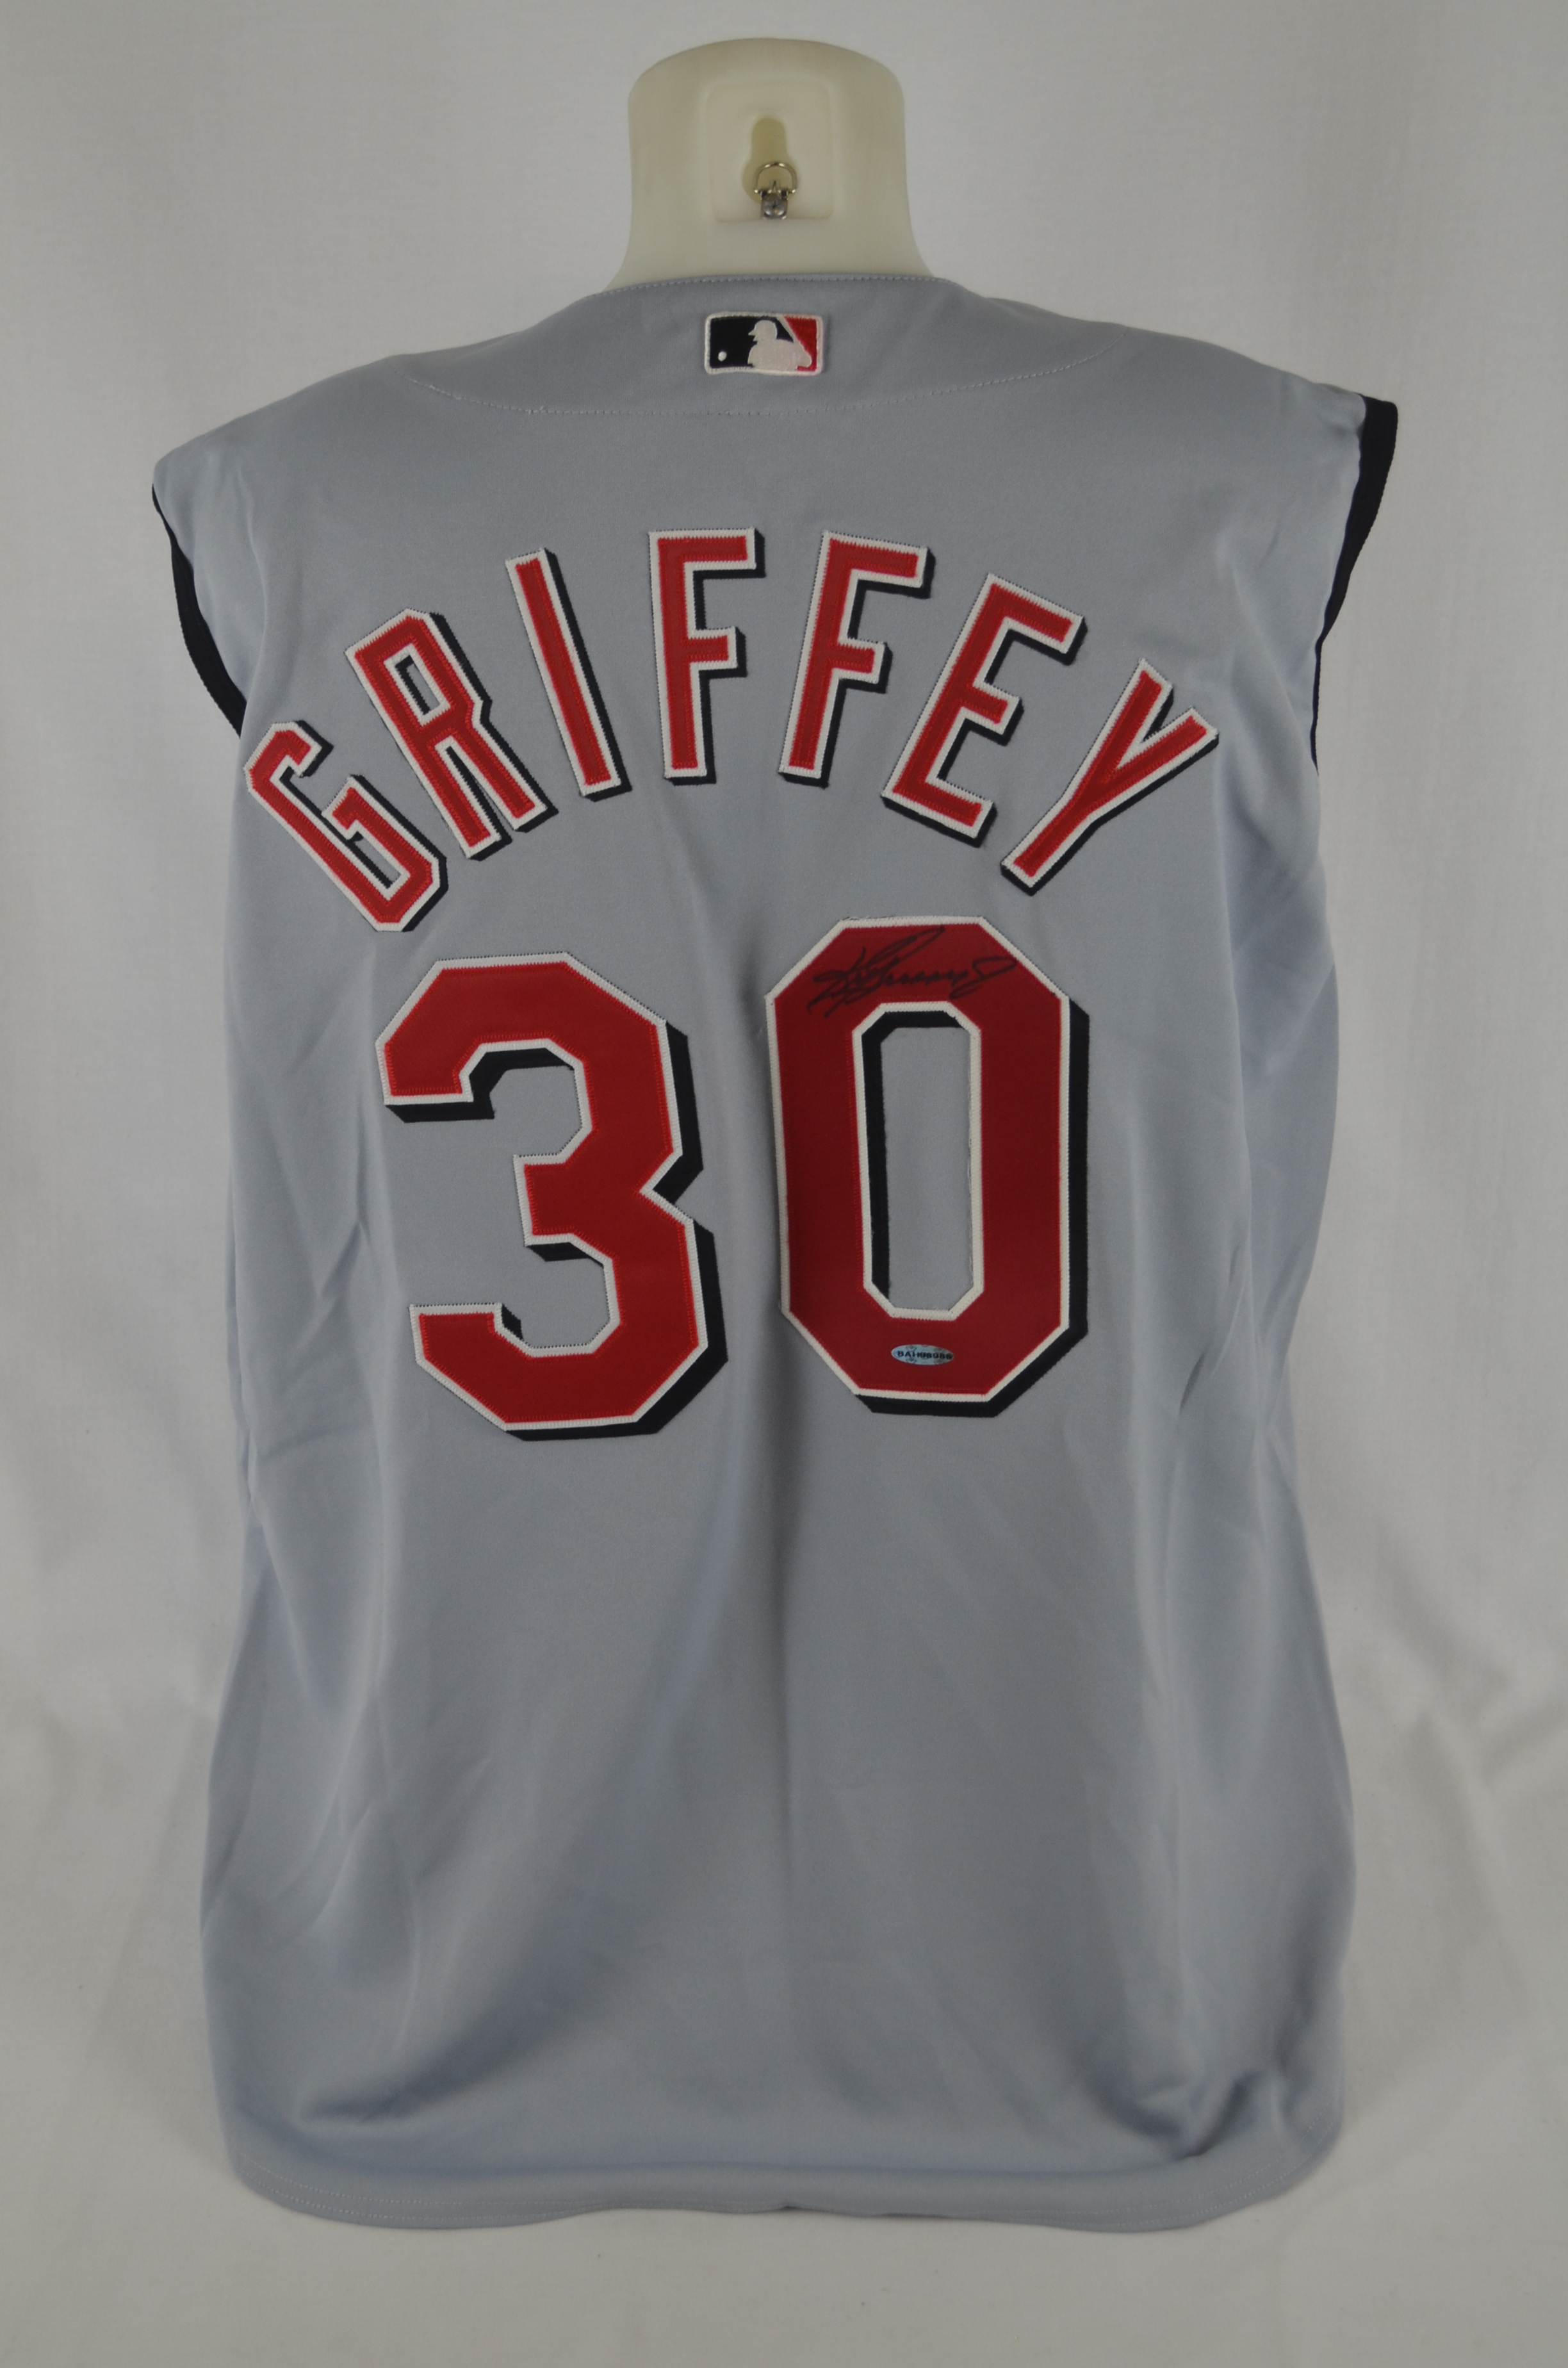 Ken Griffey Jr. Signed Authentic Russell Athletic Reds Jersey (UDA